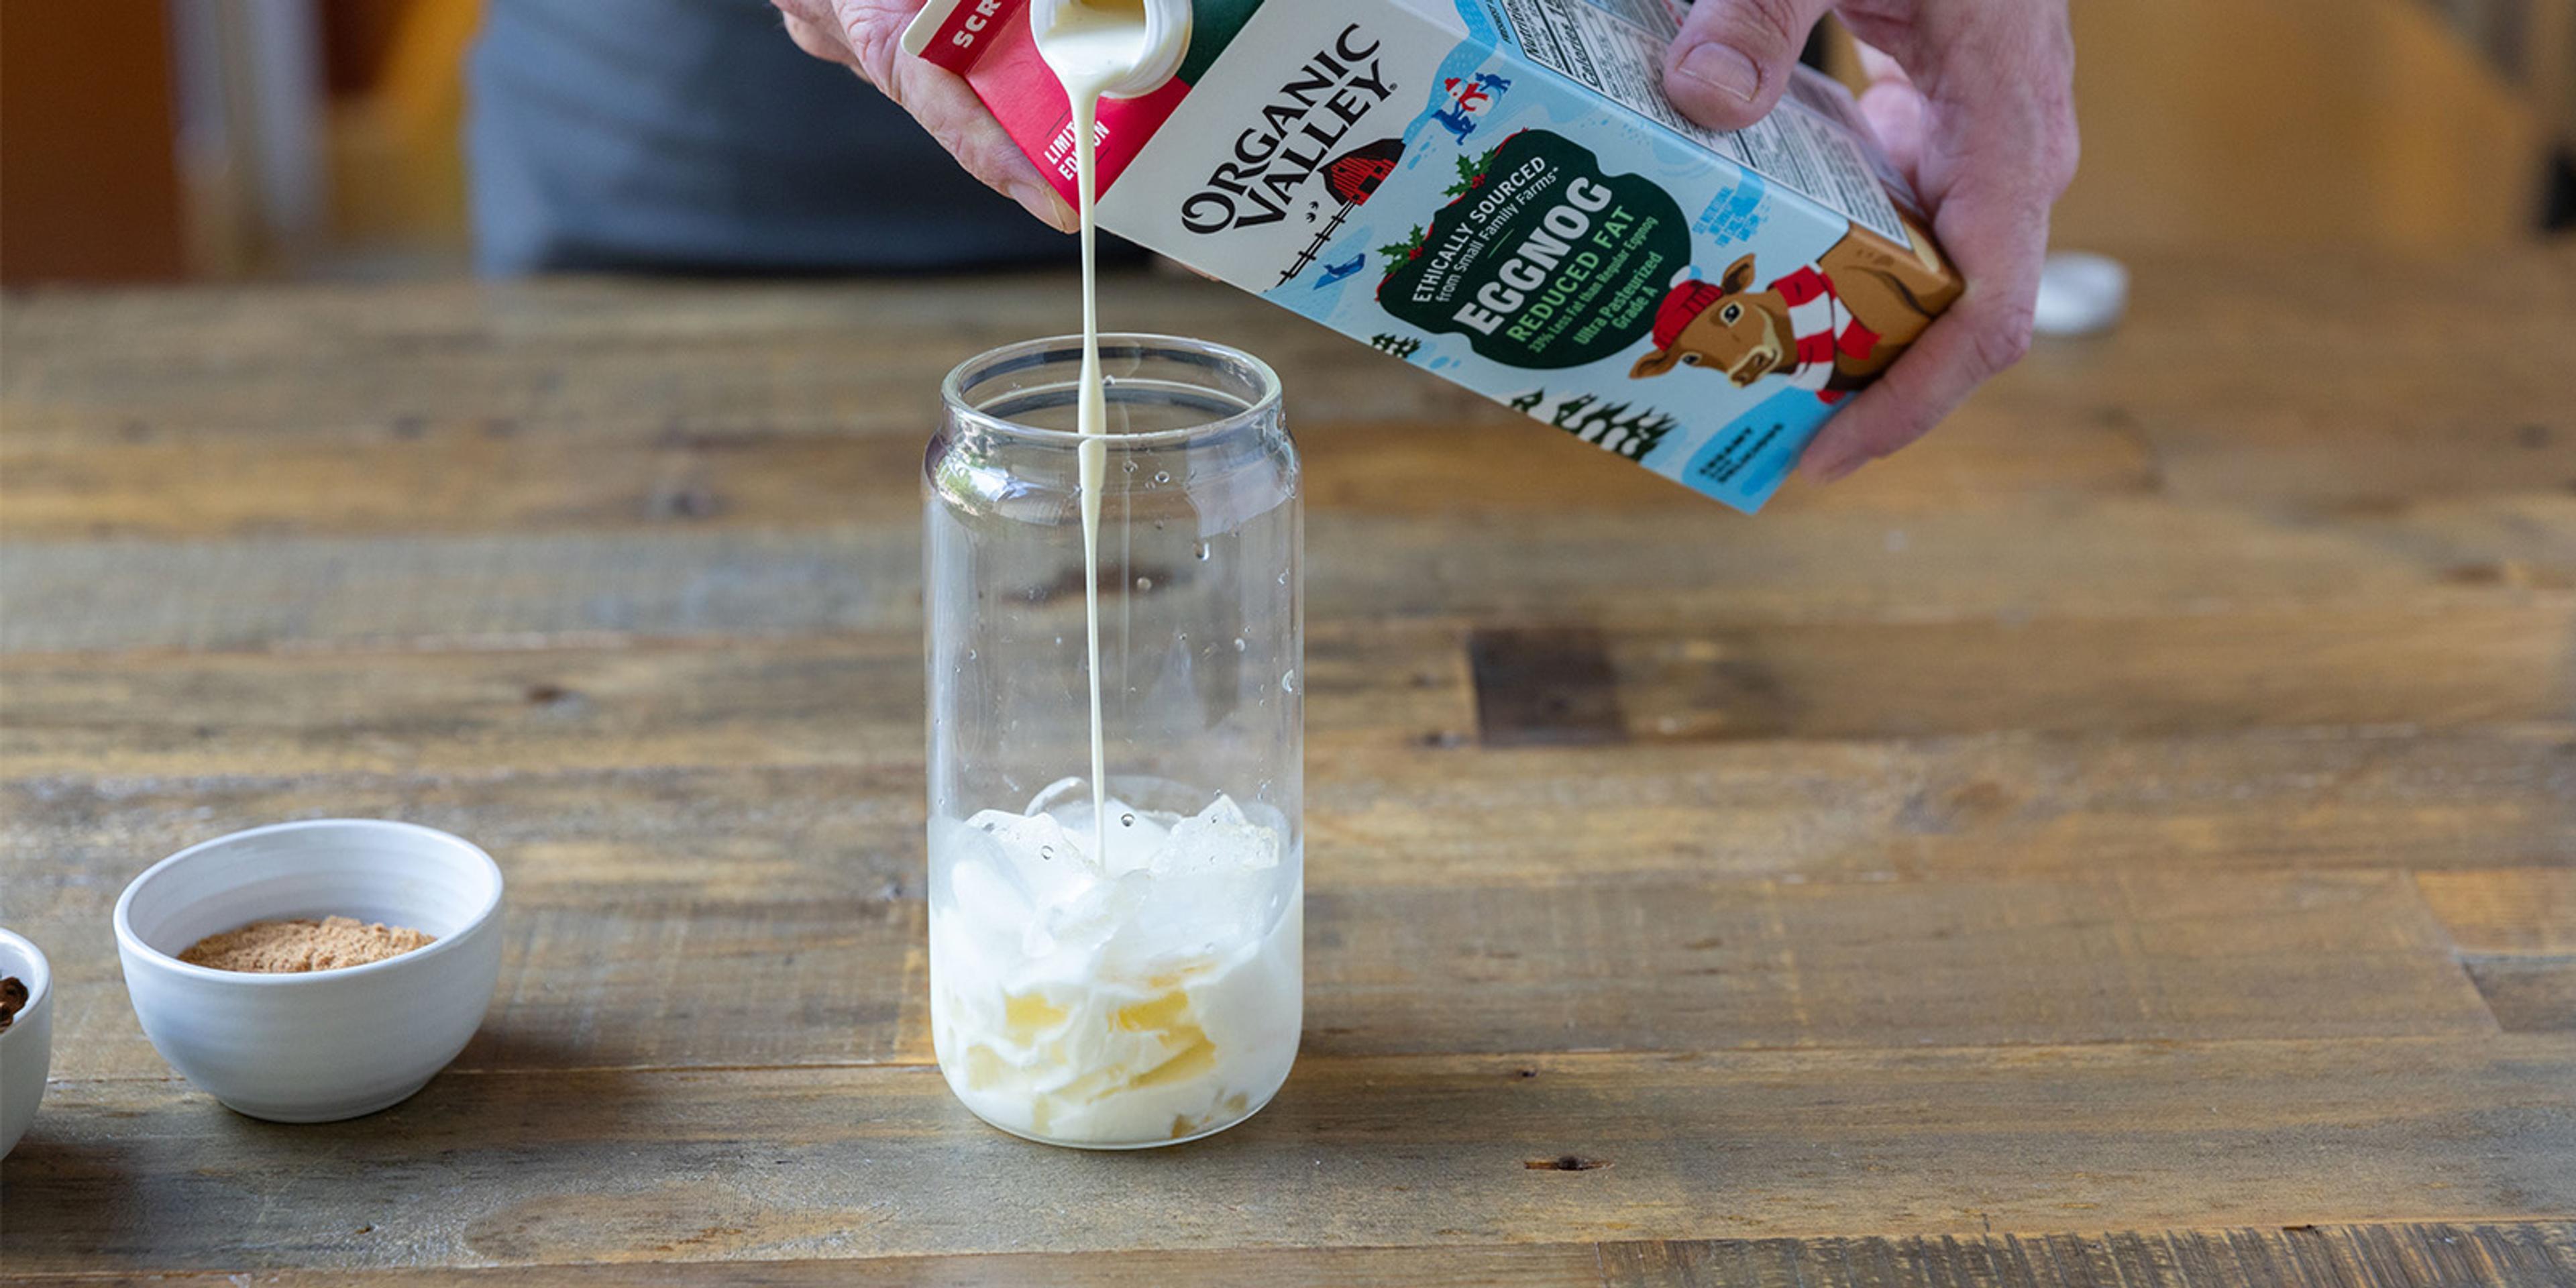 Eggnog is poured into a glass over ice.